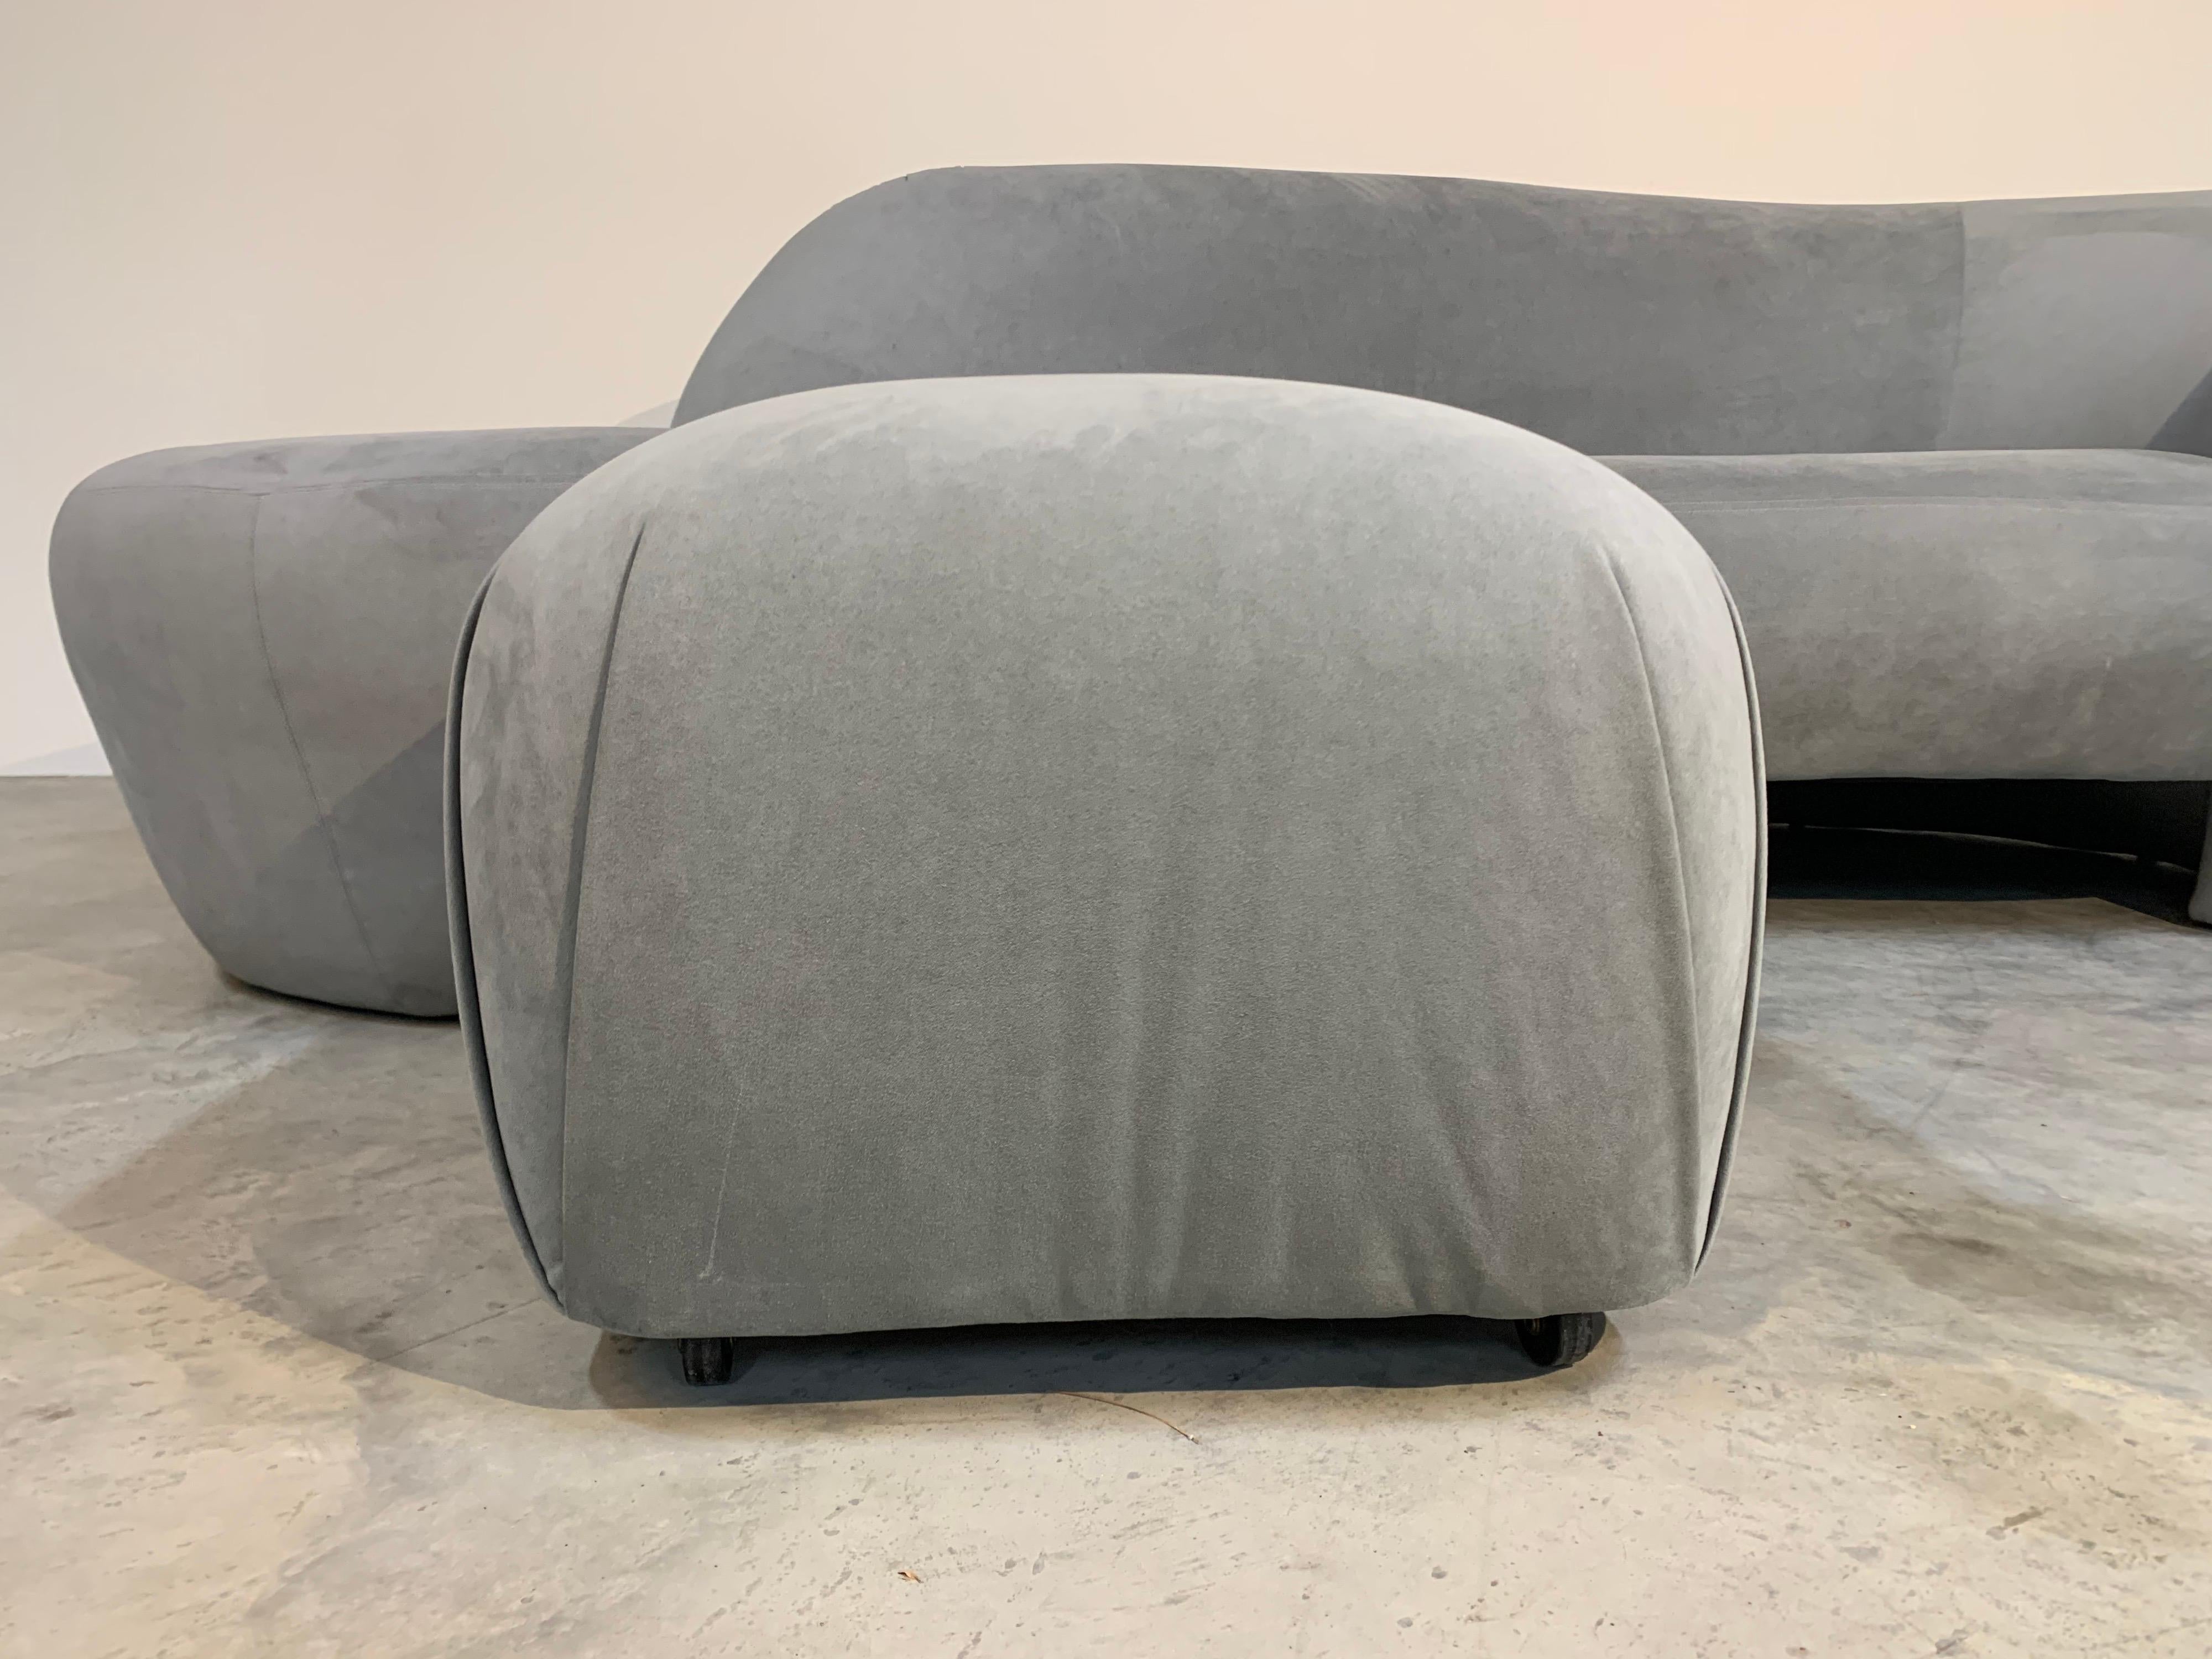 Weiman Preview Sofa Chaise Lounge with Pouf Ottoman in Ultrasuede after Kagan 6